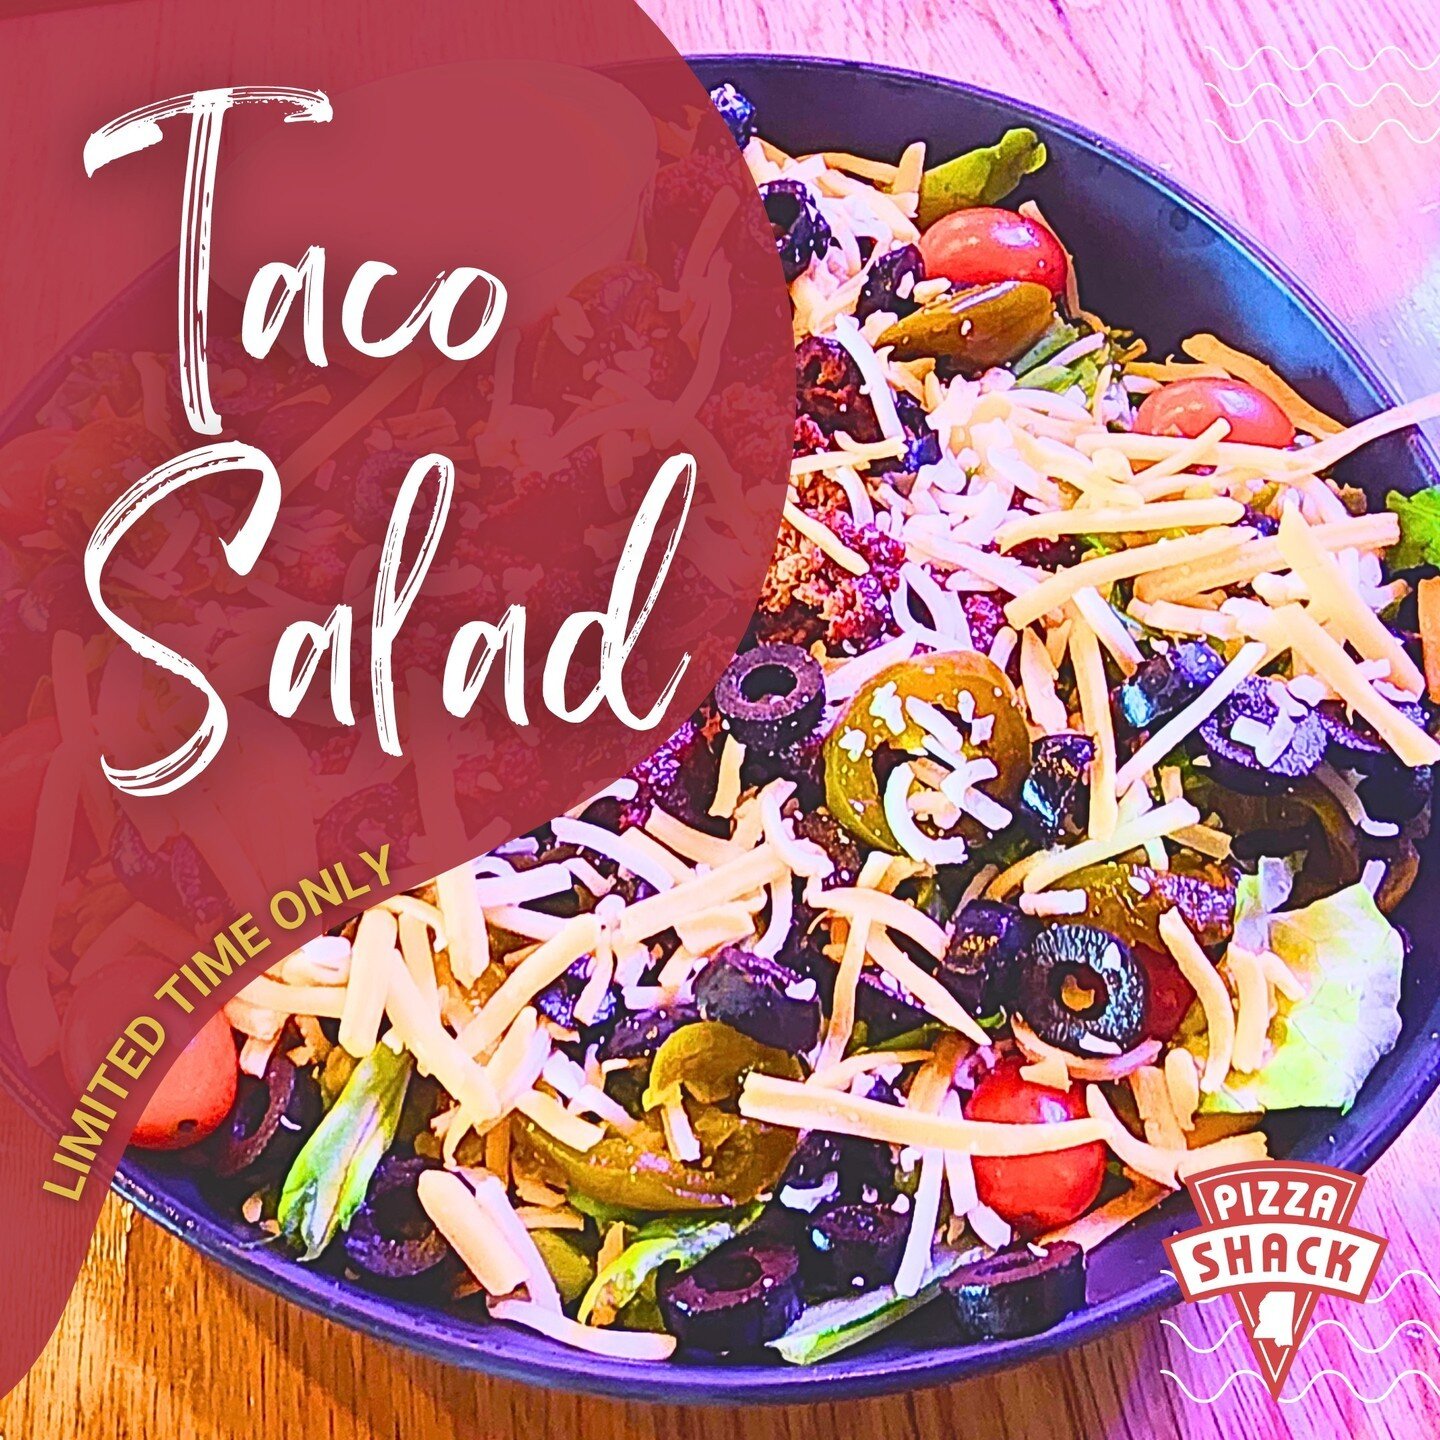 Salad and tacos collide in this delicious salad creation at Pizza Shack! Get your taste buds ready for an explosion of flavor with our Taco Salad, featuring Bibb lettuce, seasoned beef, tomato, jalapeno, black olives, Doritos, cheddar and Monterey Ja